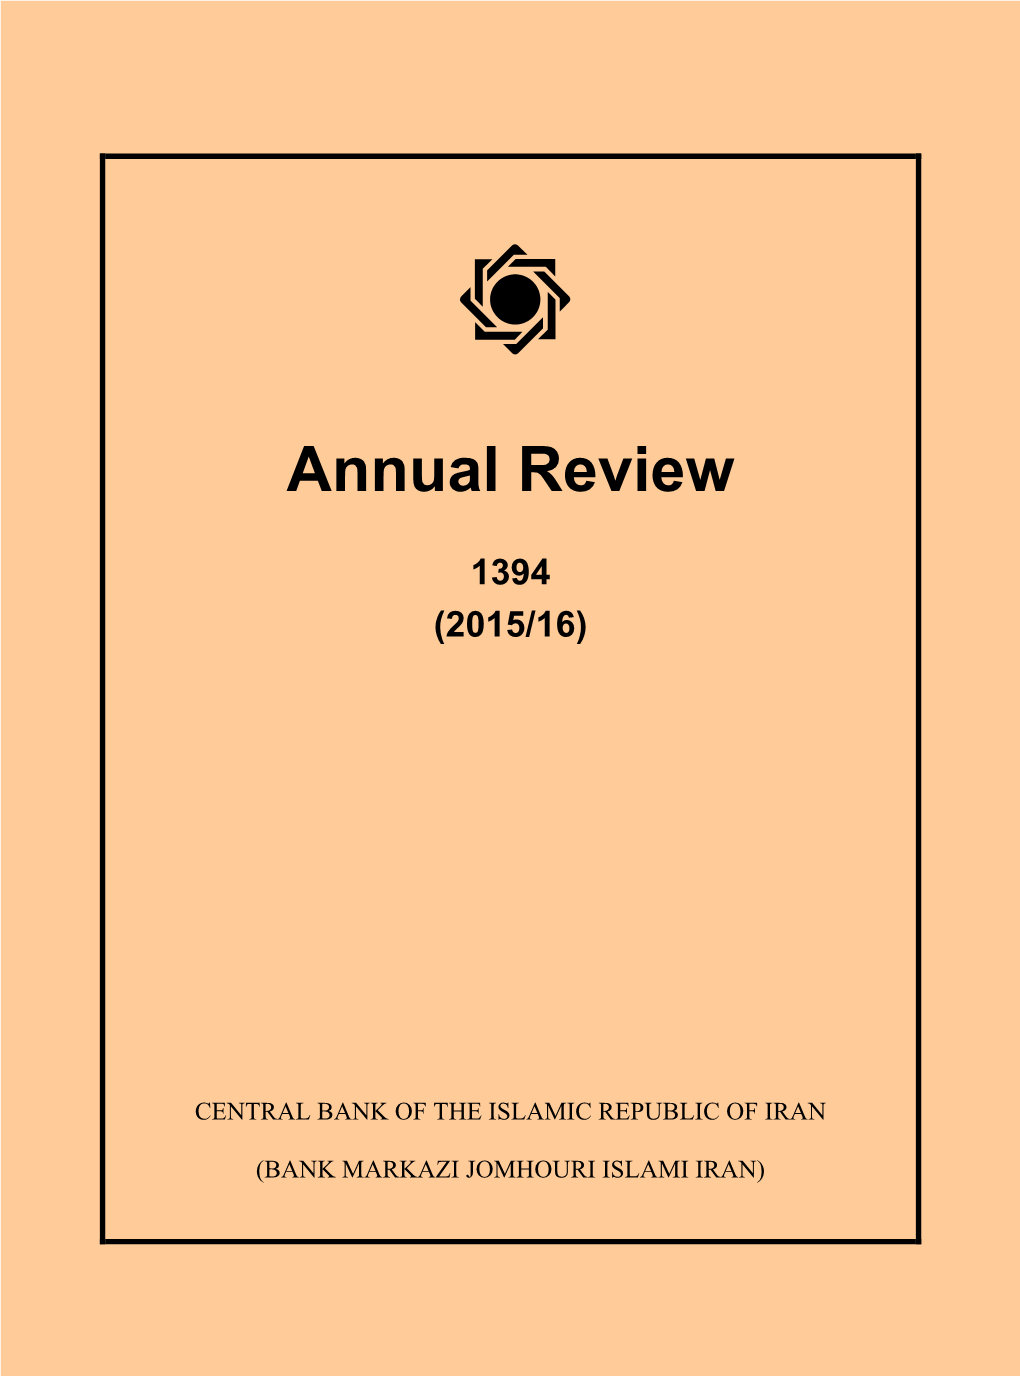 Annual Review 2015/16